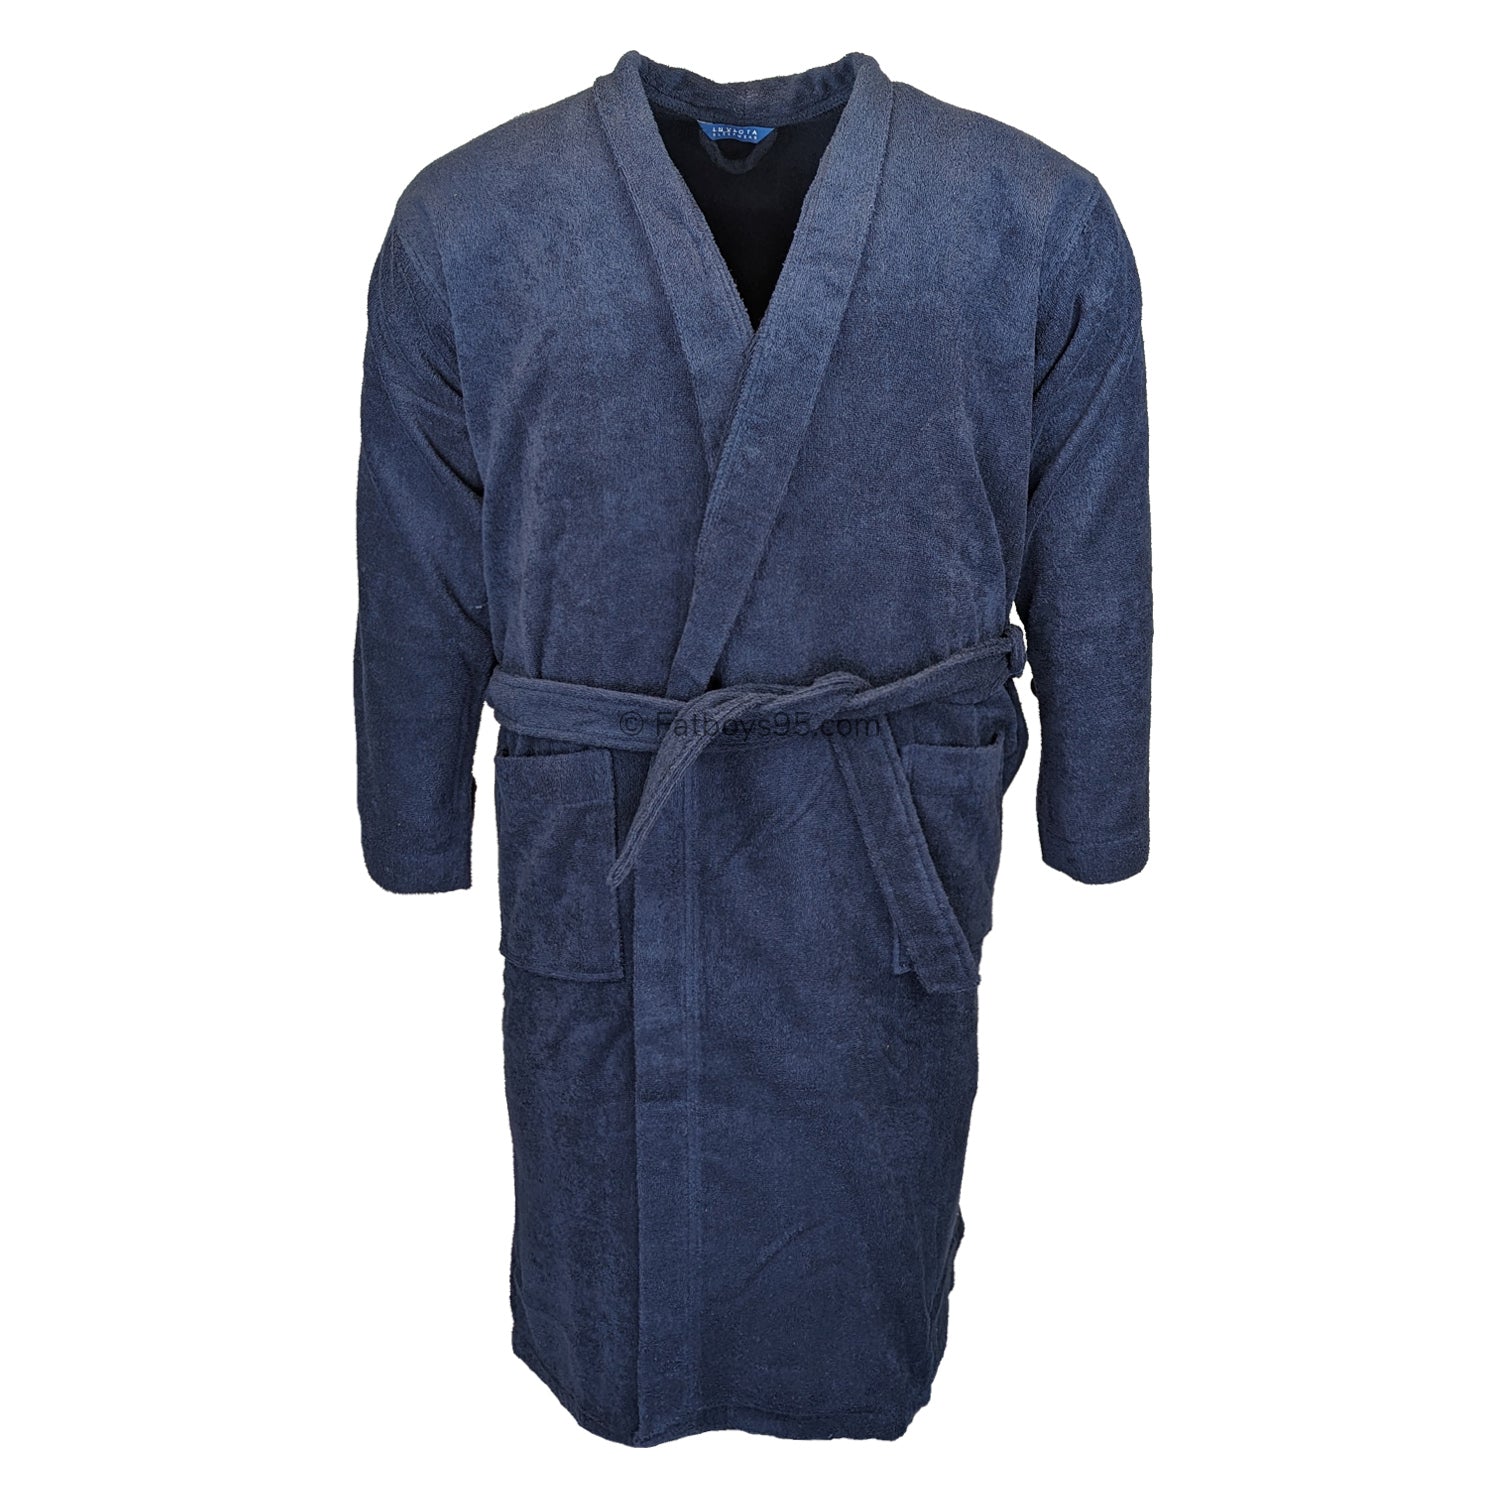 Invicta Dressing Gown - 08533 - Navy 1